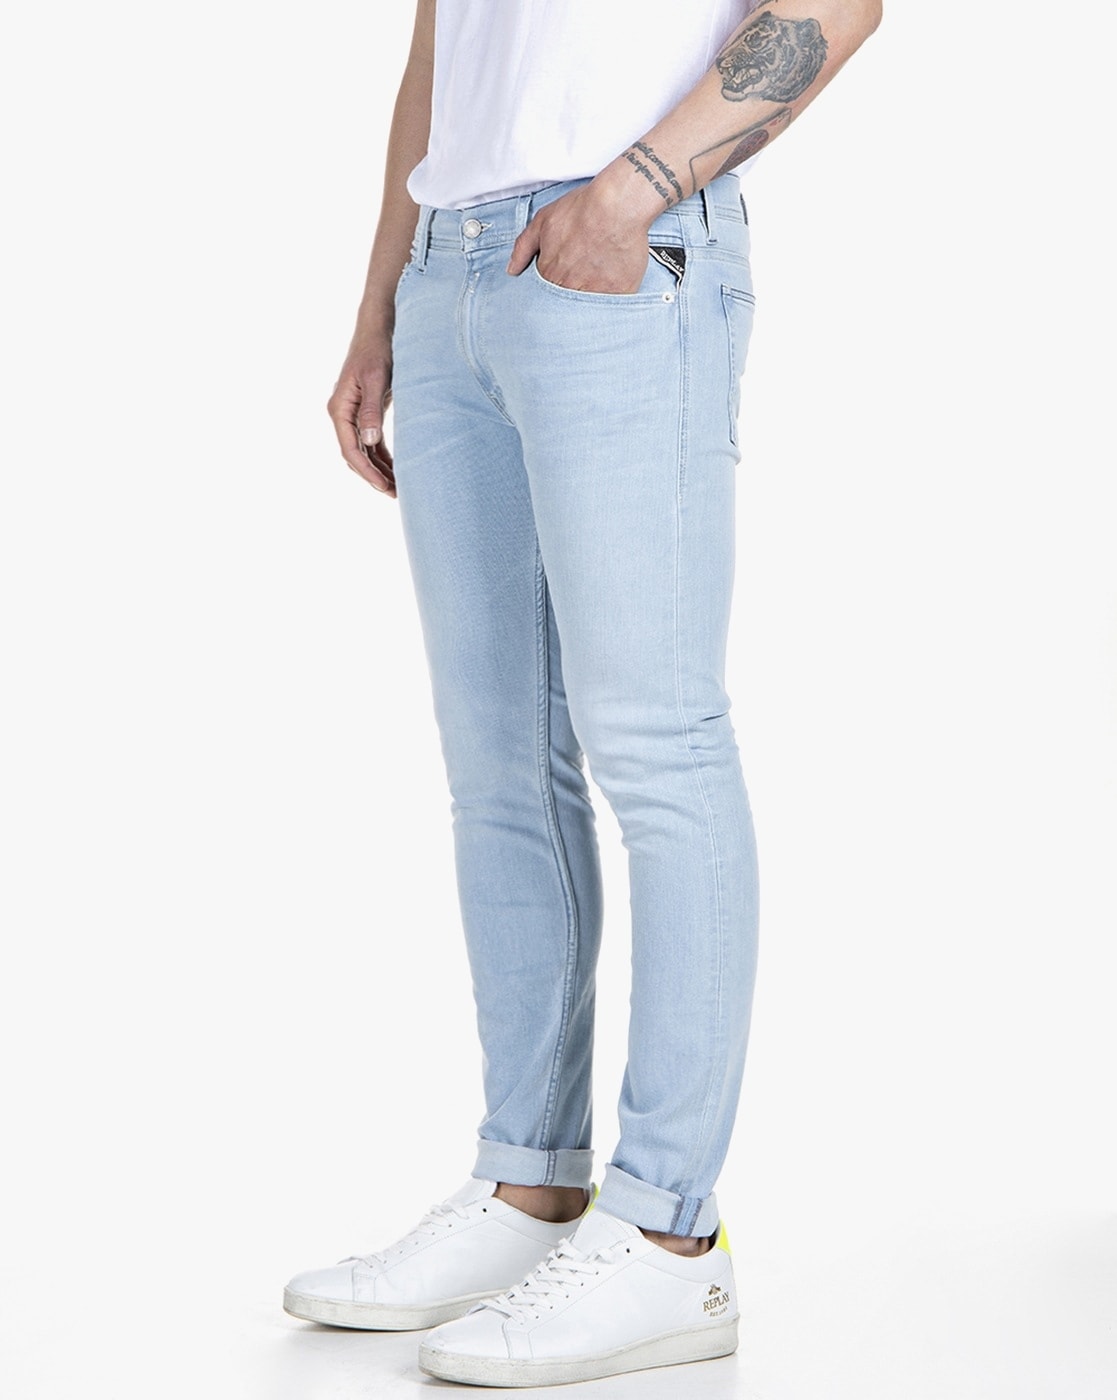 Buy Blue Jeans for Men by REPLAY Online